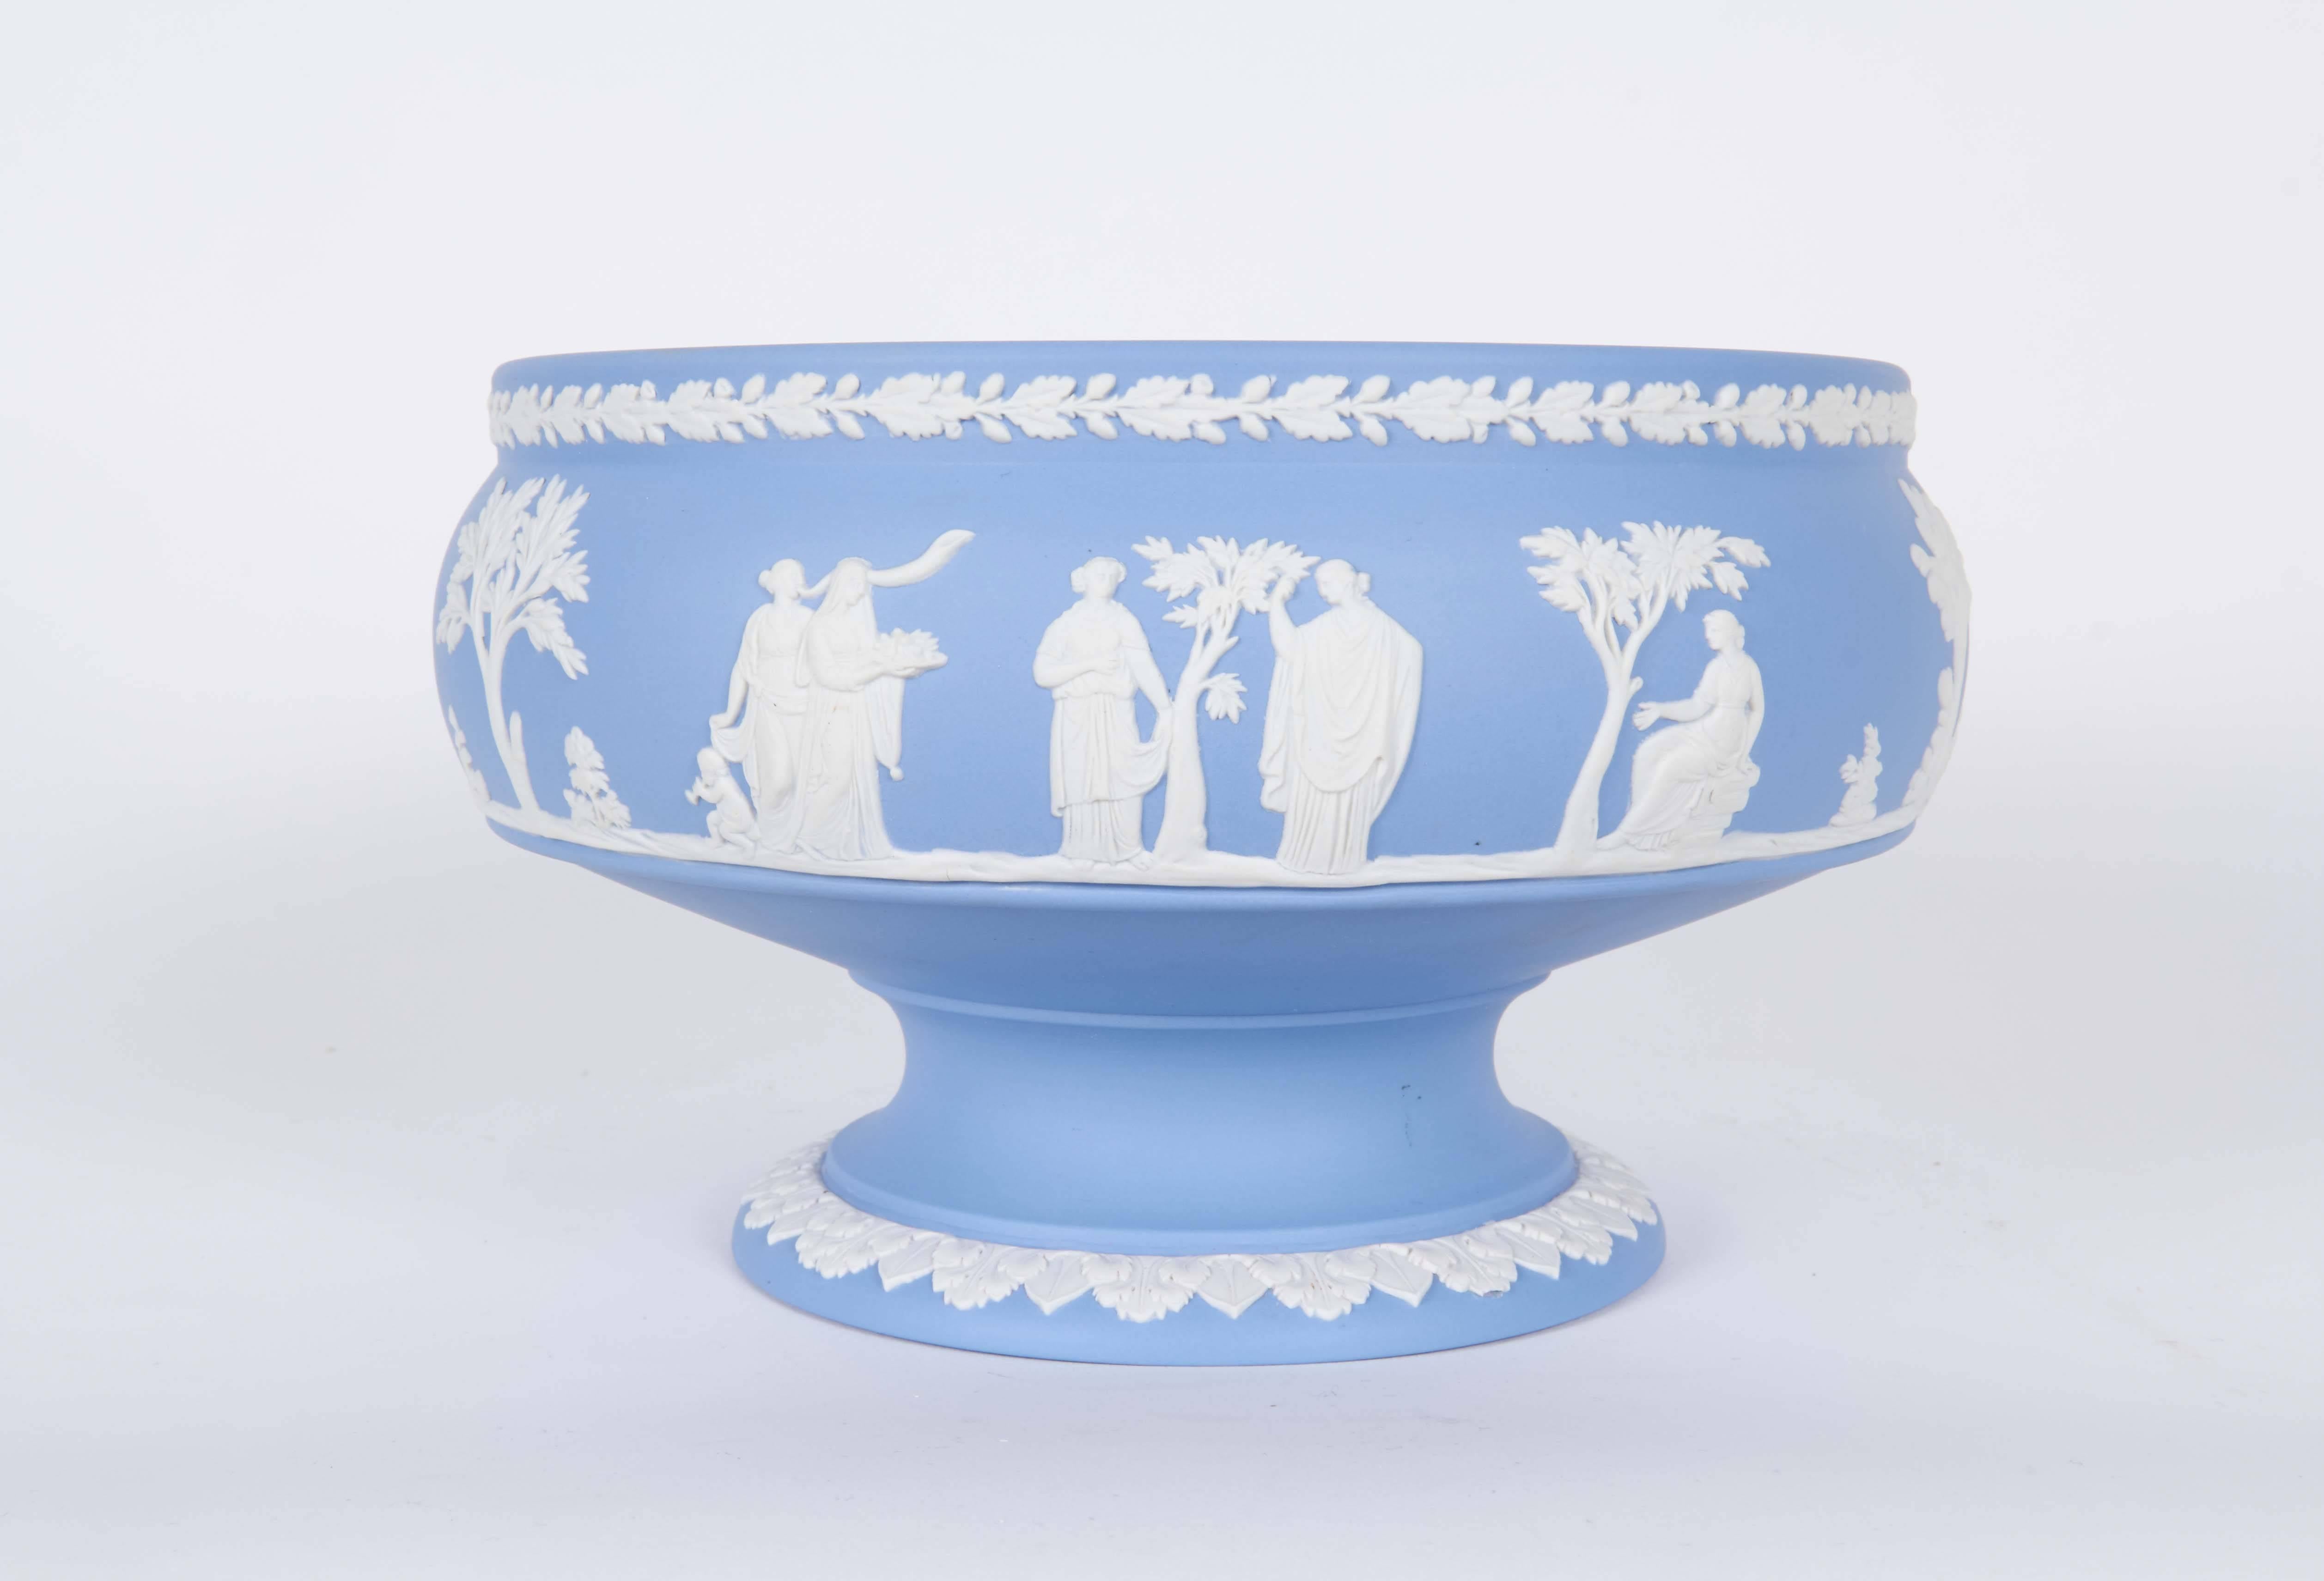 A pair of porcelain candlesticks and matching bowl manufactured by Wedgwood circa 1950s, each in brilliant blue jasperware, depicting classical Greco-Roman scenes in relief. Markings include [Made in England] and [Wedgwood] impressed to the bases of